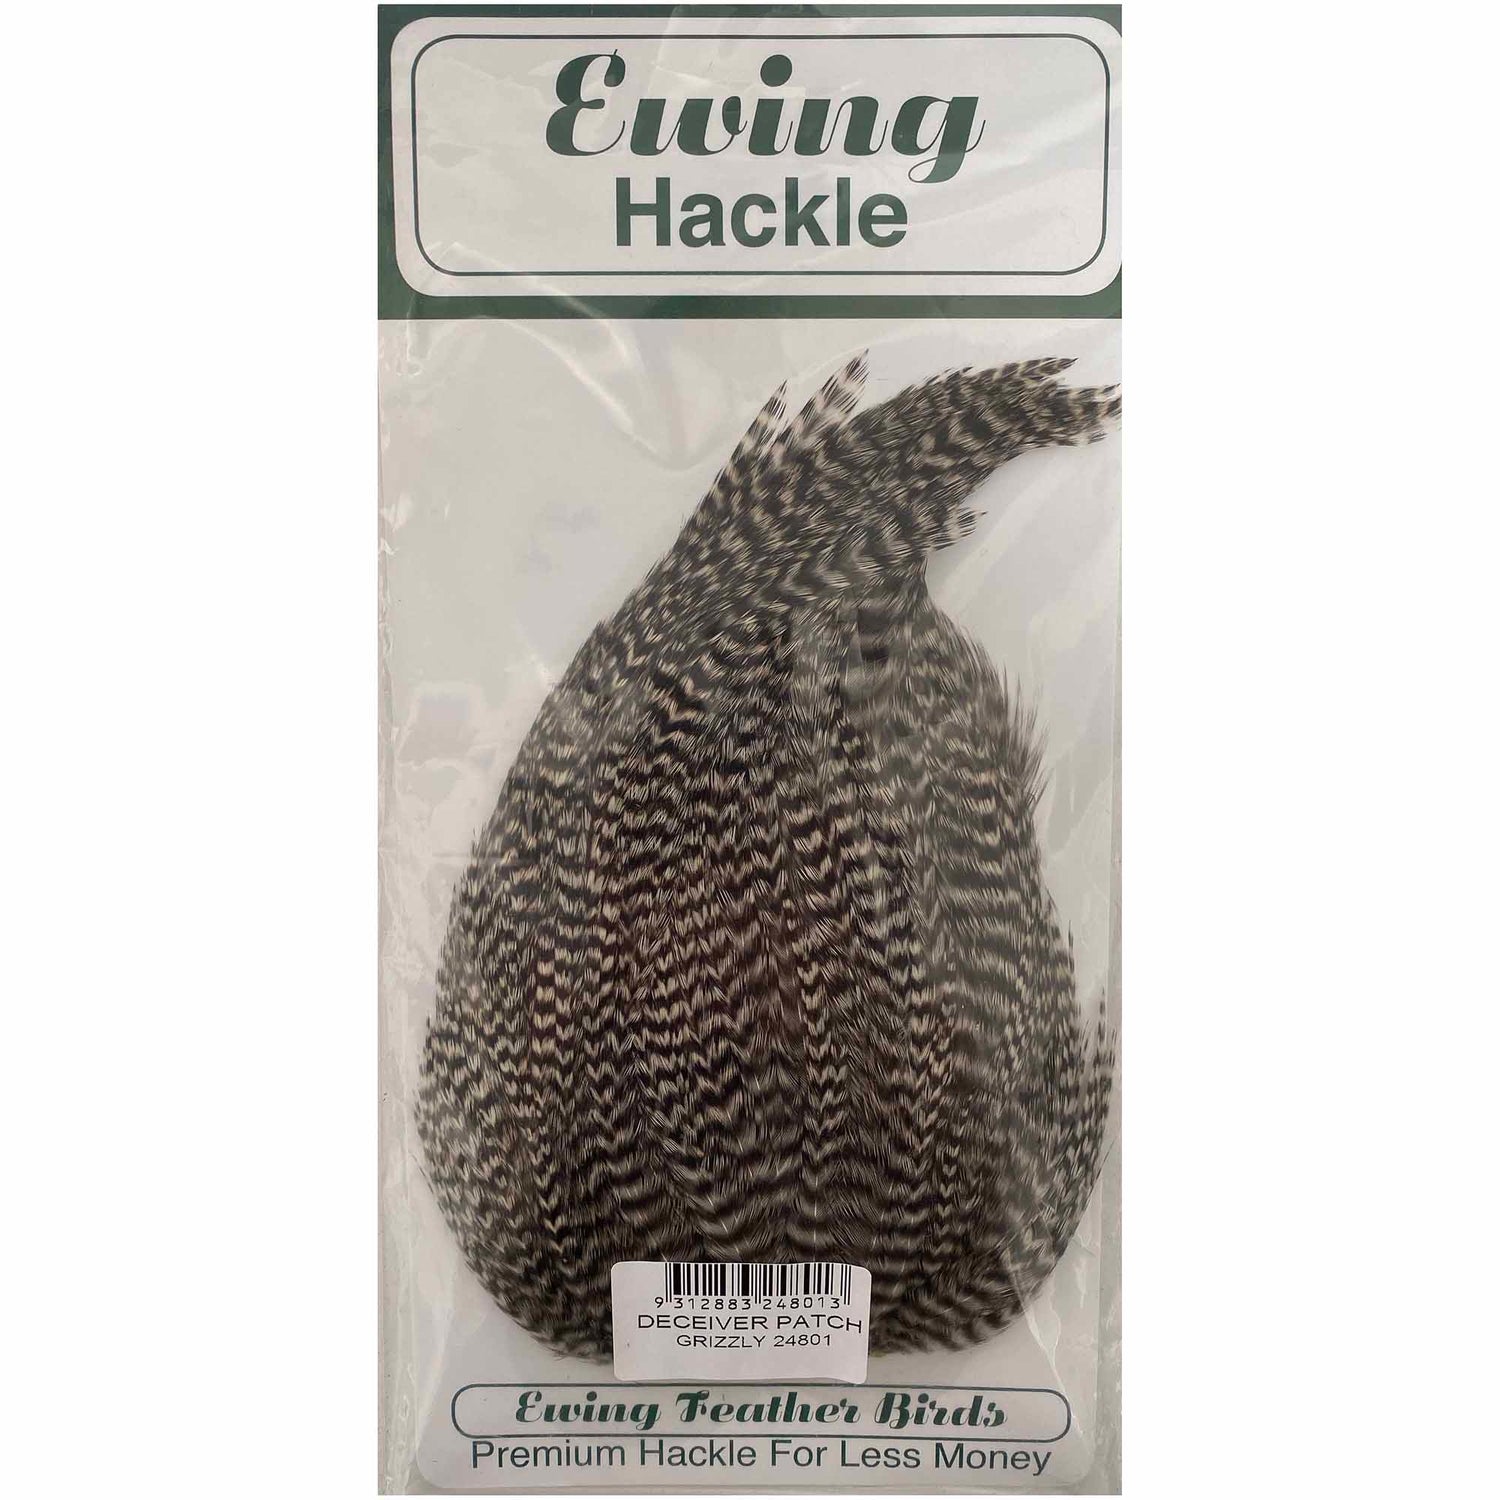 Ewing Hackle Deceiver Patch-Fly Fishing - Fly Tying Material-Ewing Hackle-Grizzly-Fishing Station